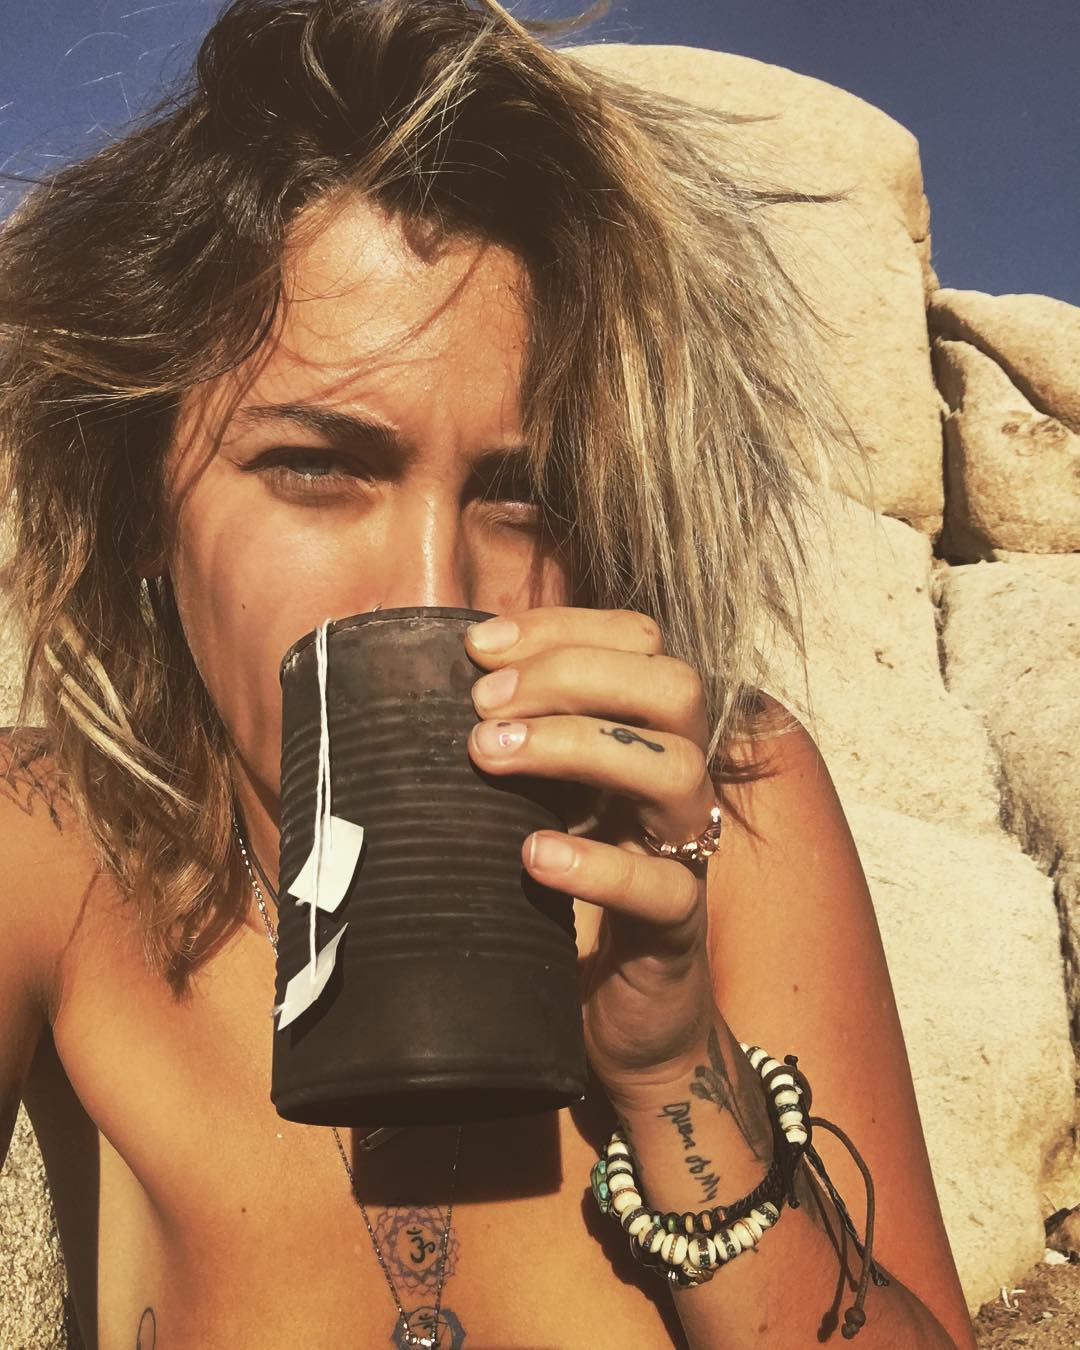 Paris Jackson Topless â€” she really loves to be naked - ScandalPost